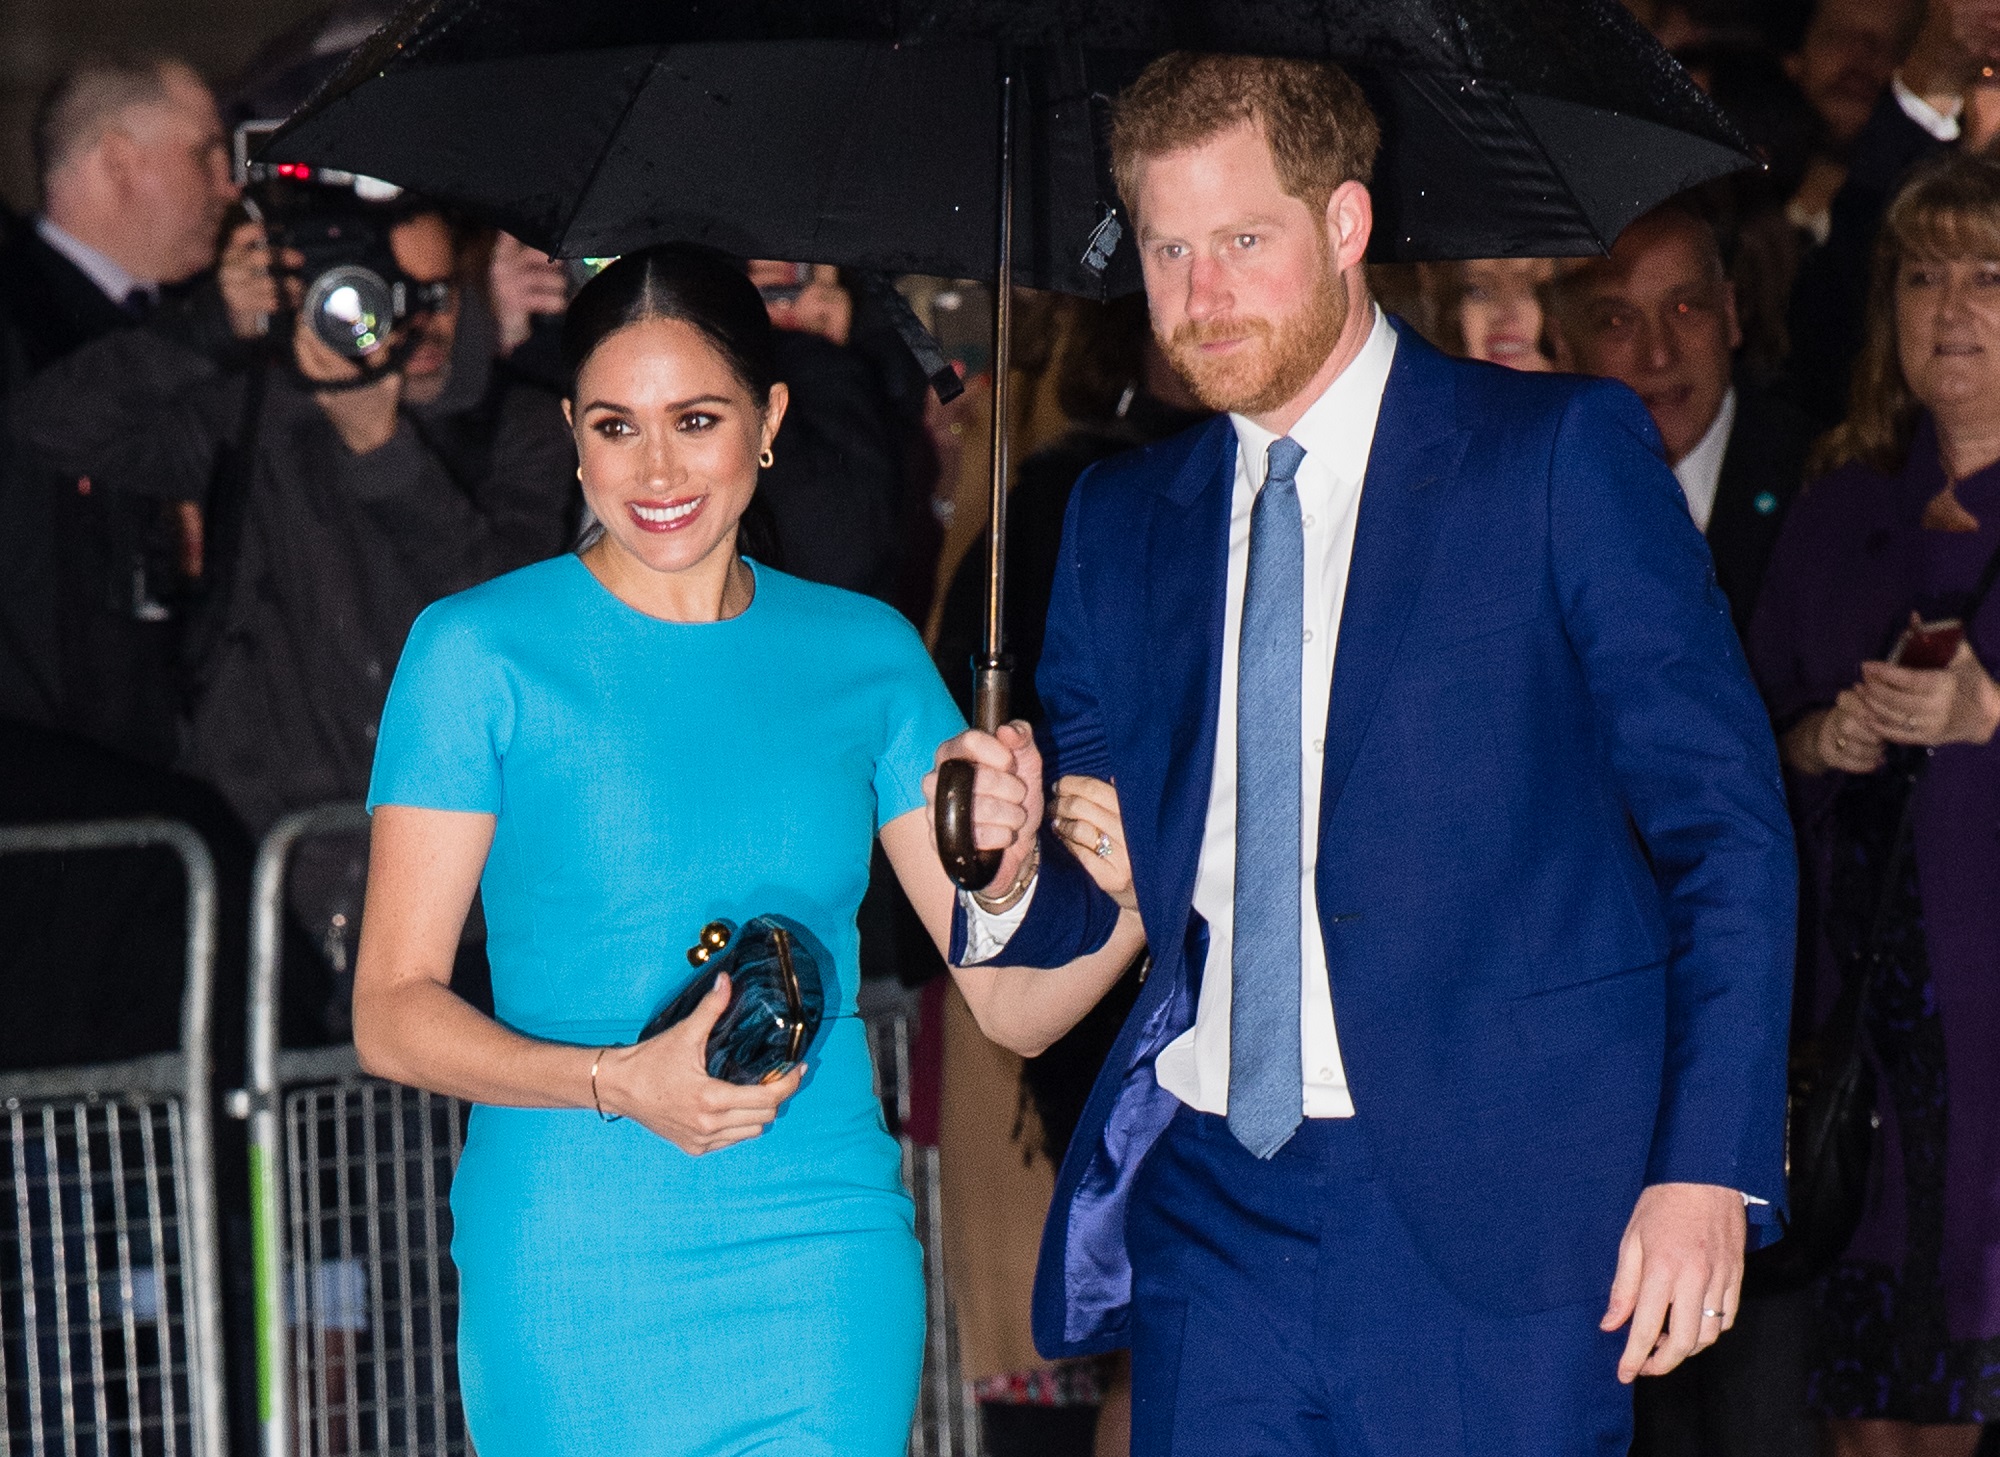 Prince Harry and Meghan Markle stand under an umbrella with Meghan wearing a turquoise dress and Harry in a blue suit